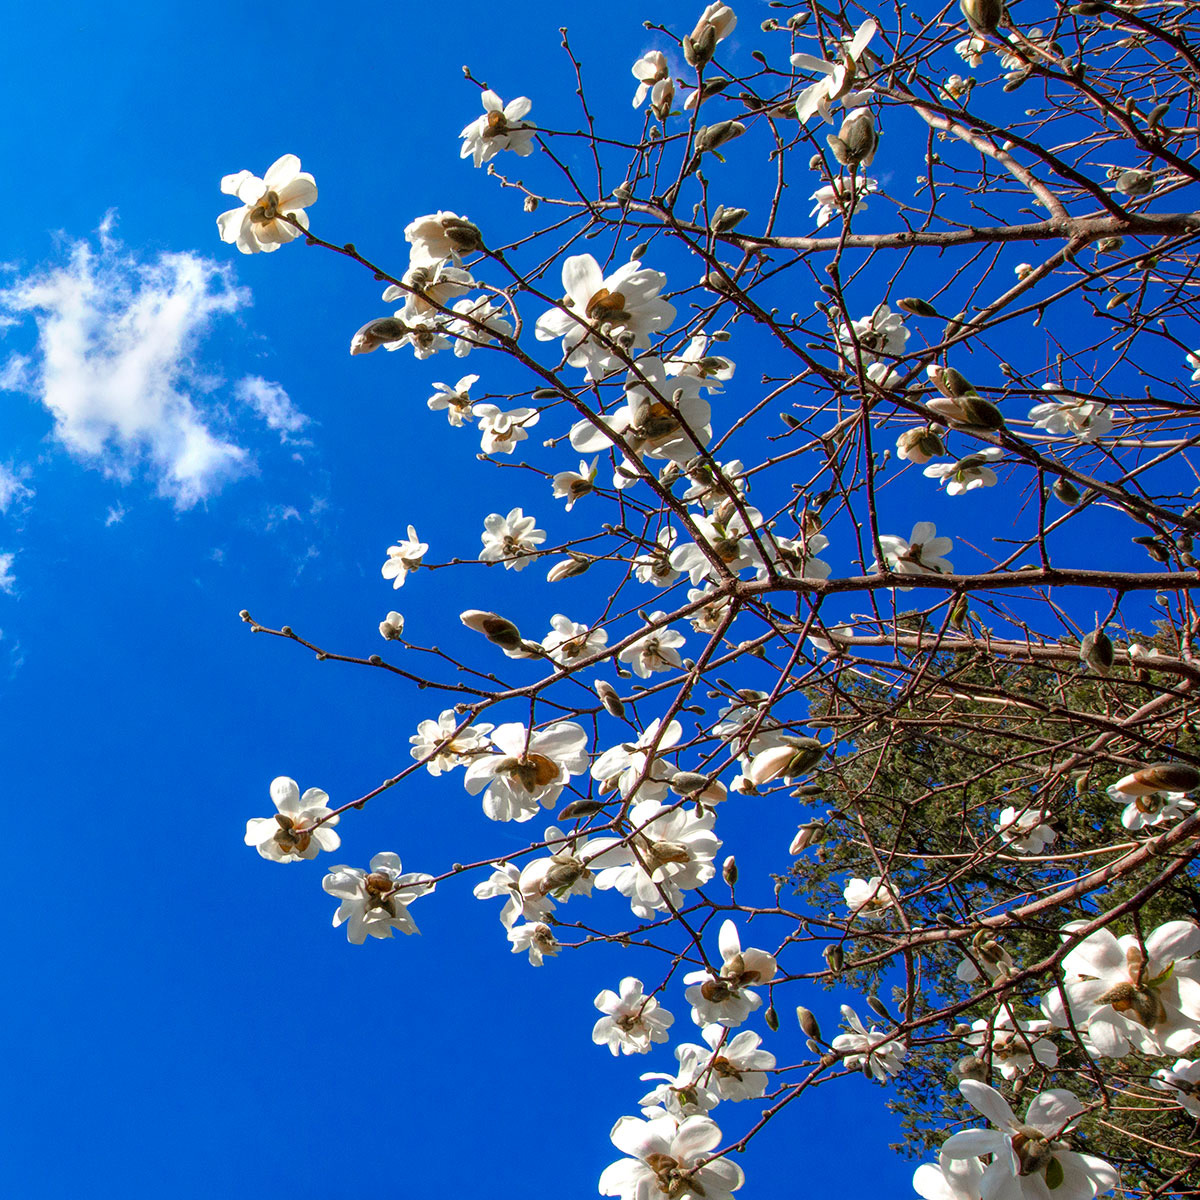 Tree blossoms on blue sky background